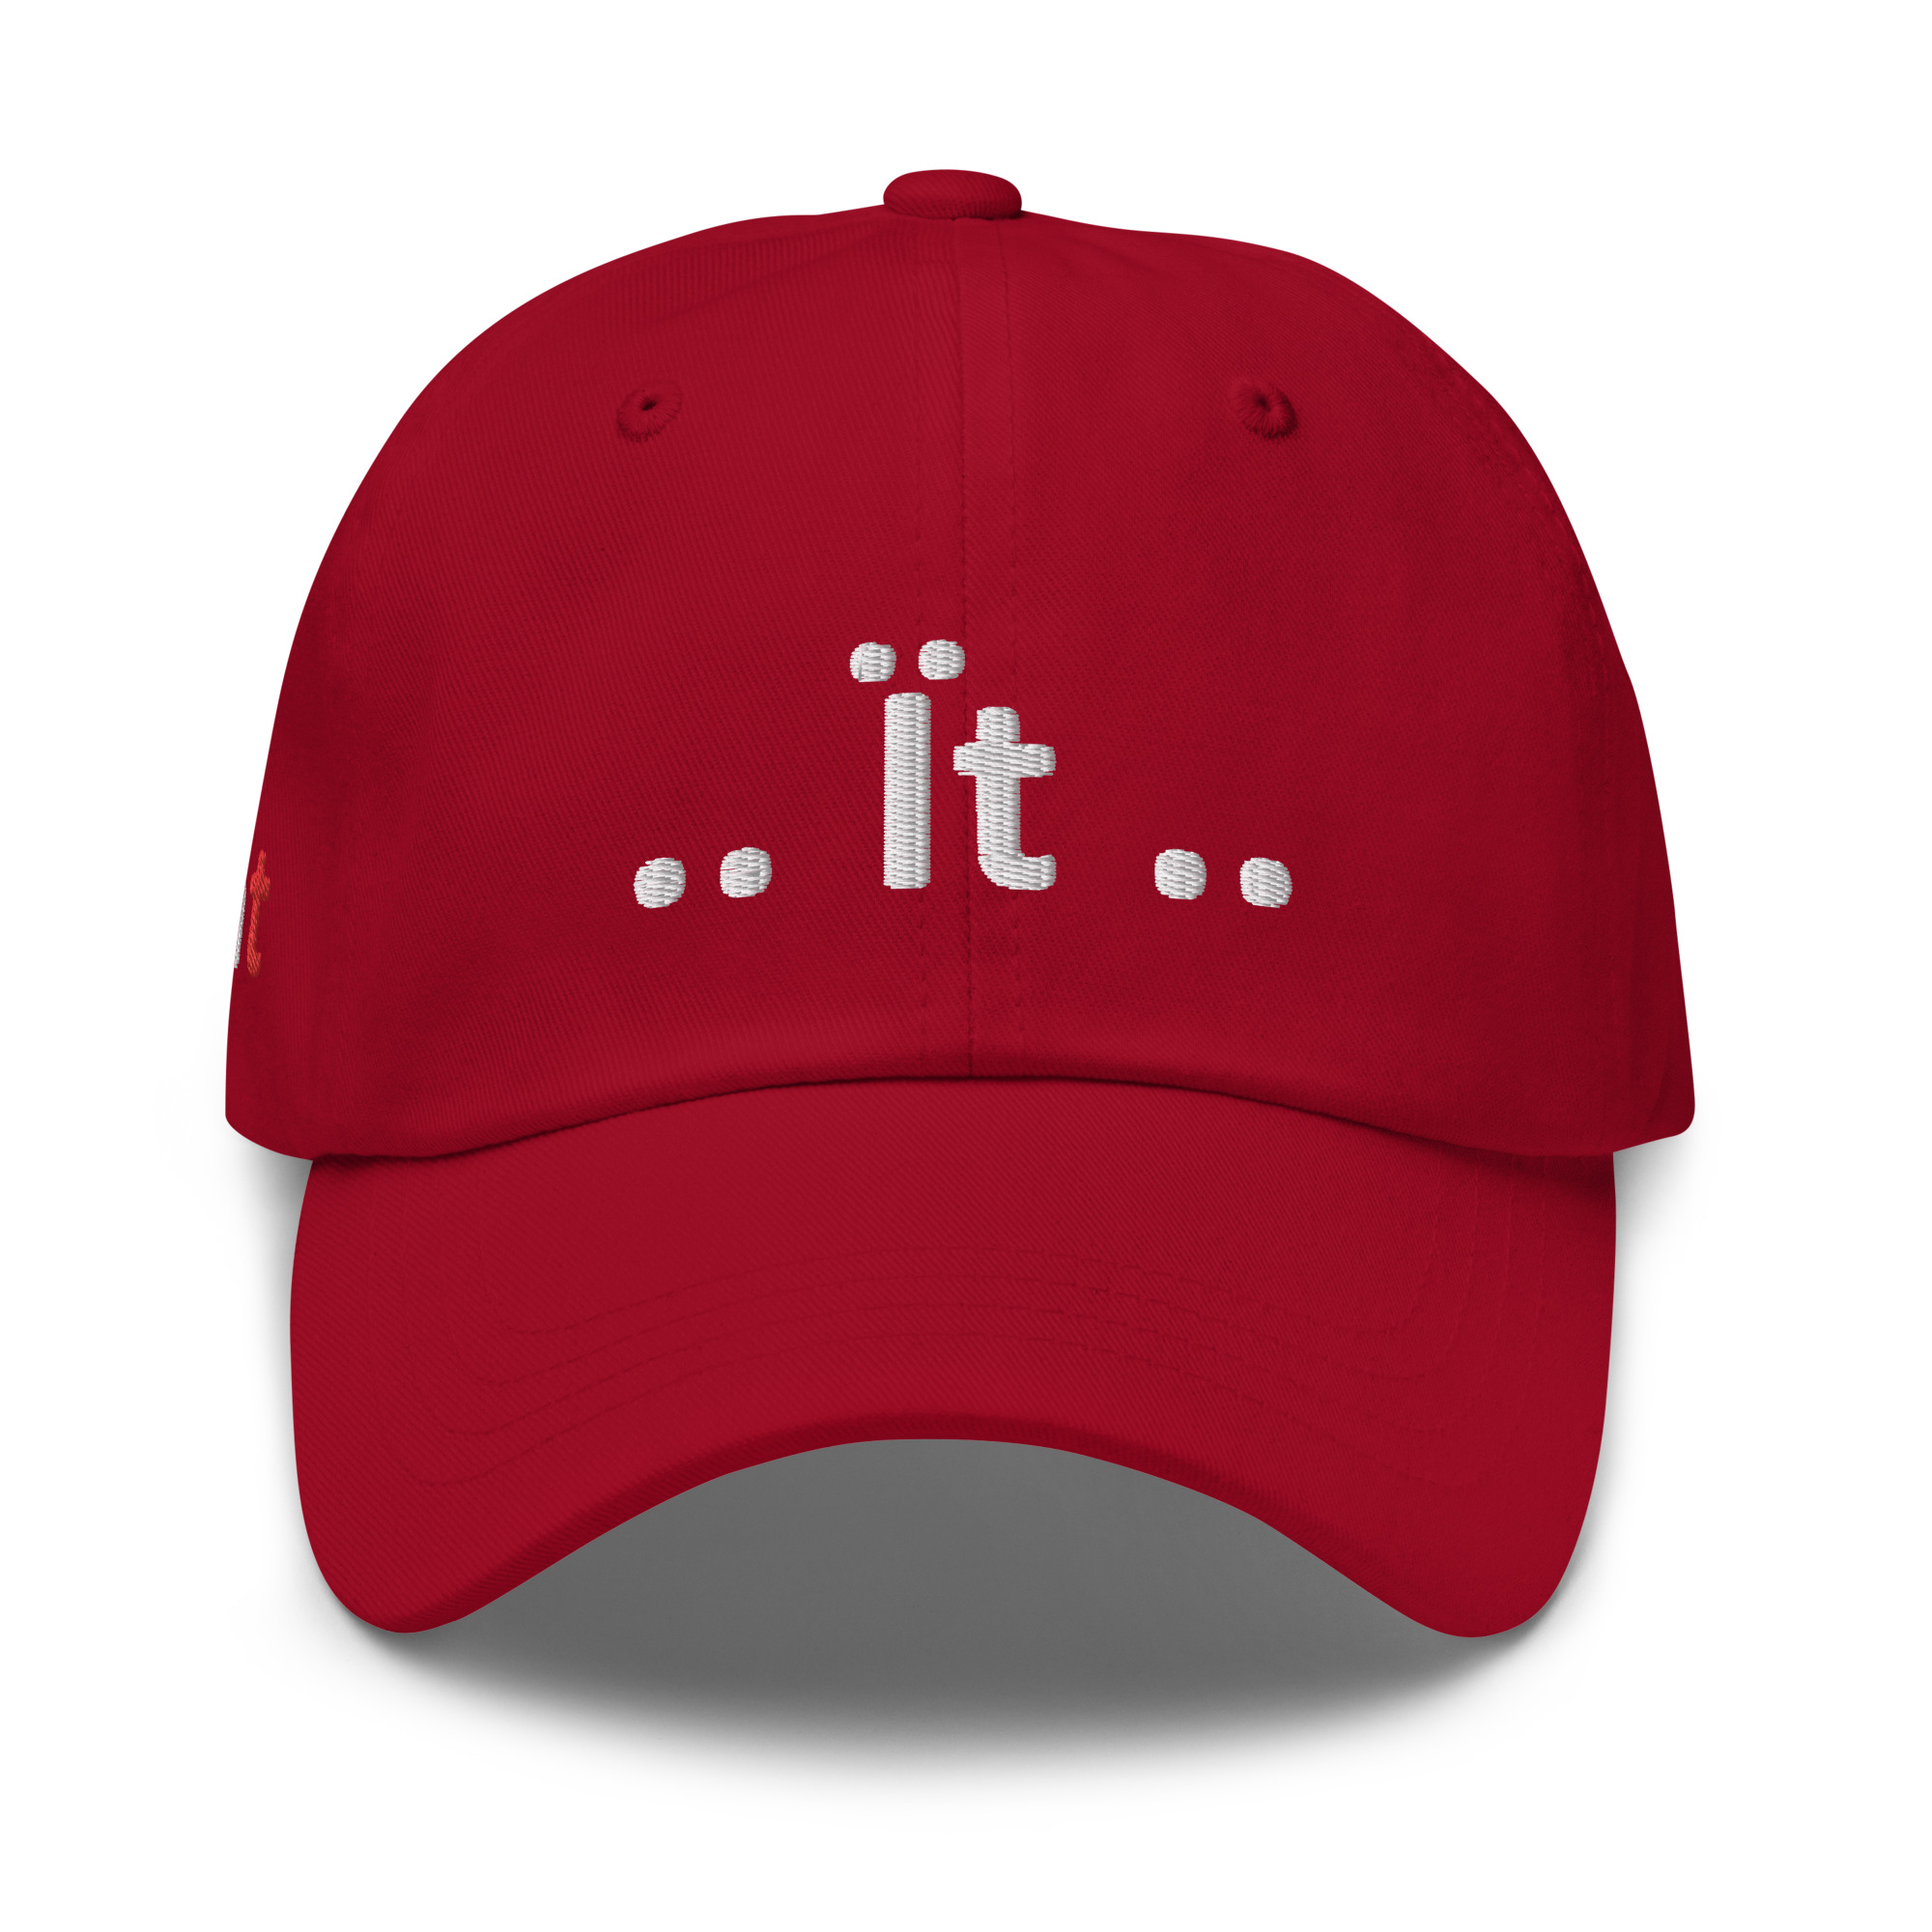 Red baseball cap with "dot it dot" embroidery.